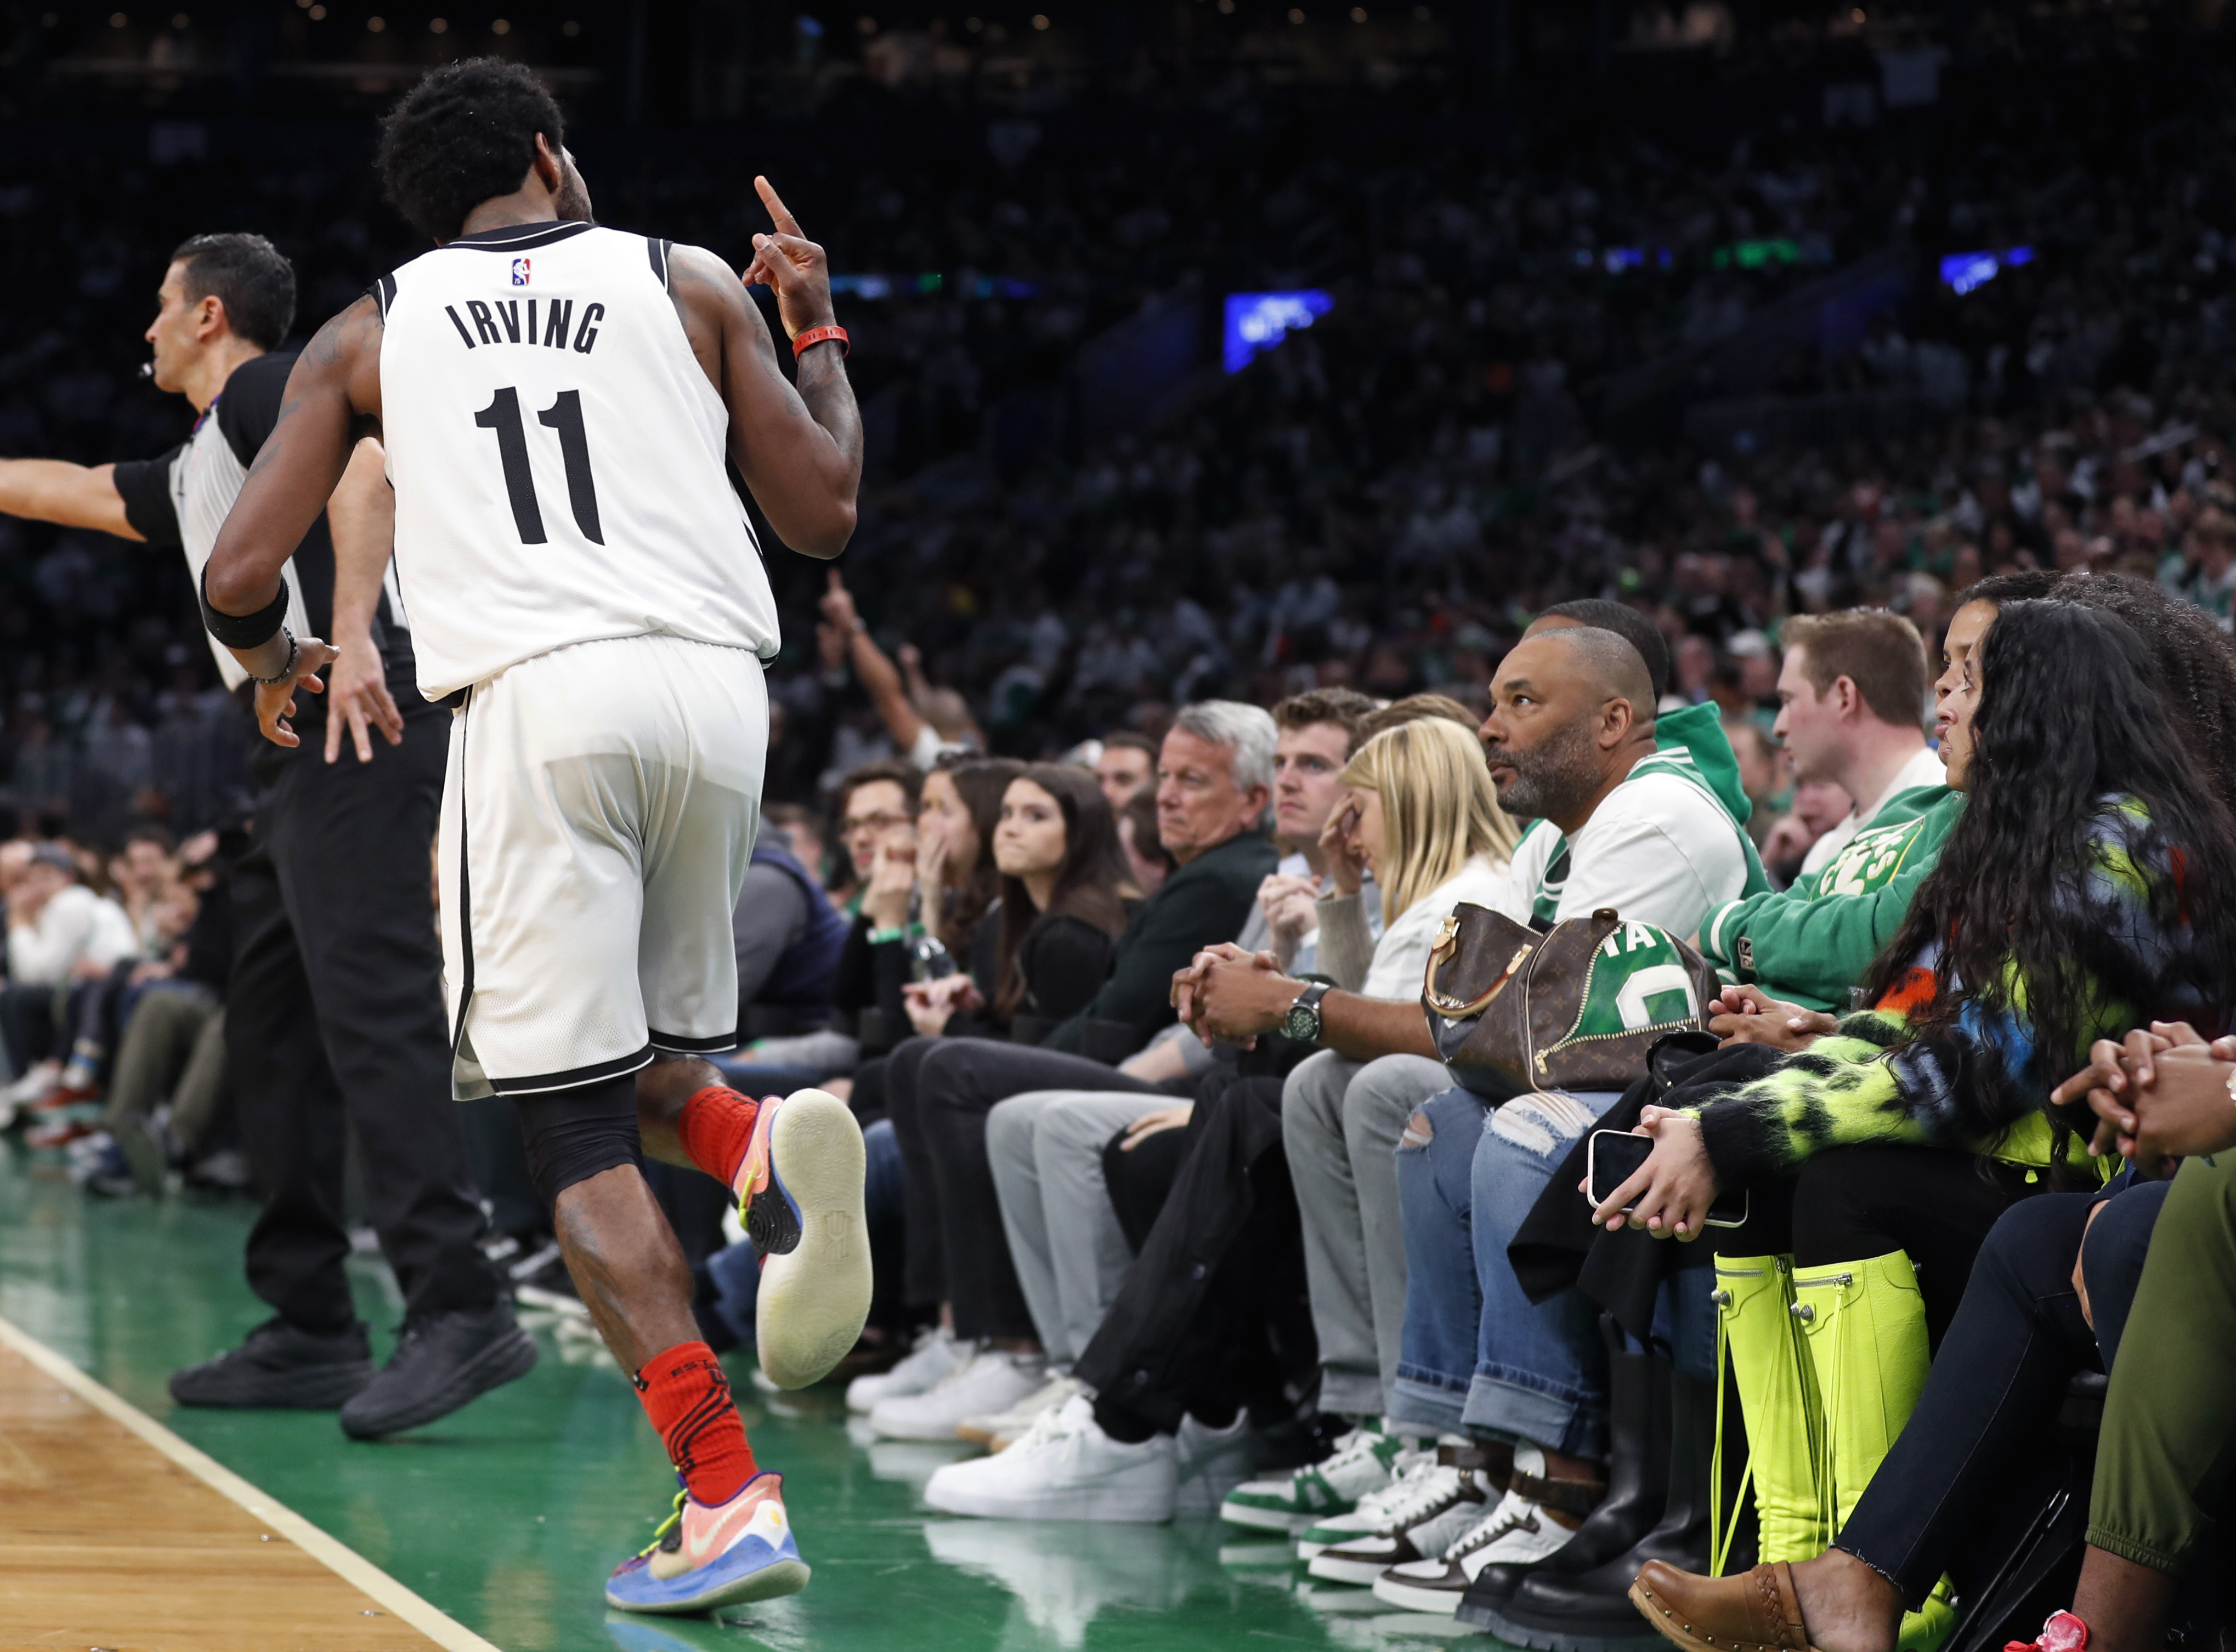 Playoffs show Nets' Kyrie Irving has come into his own, on court and off